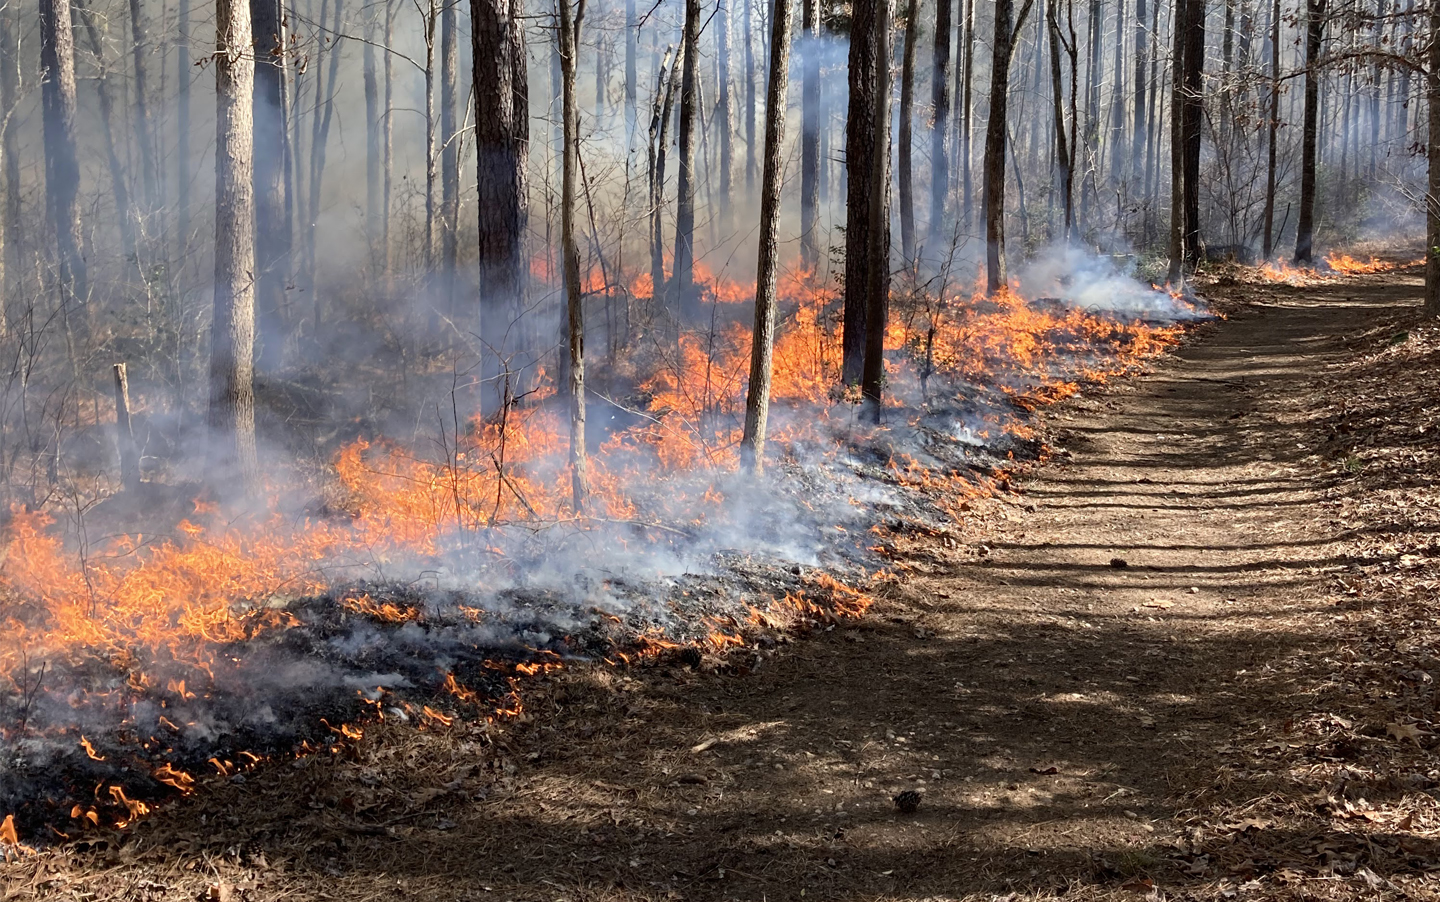 Photo of small flames from prescribed fire in a forest